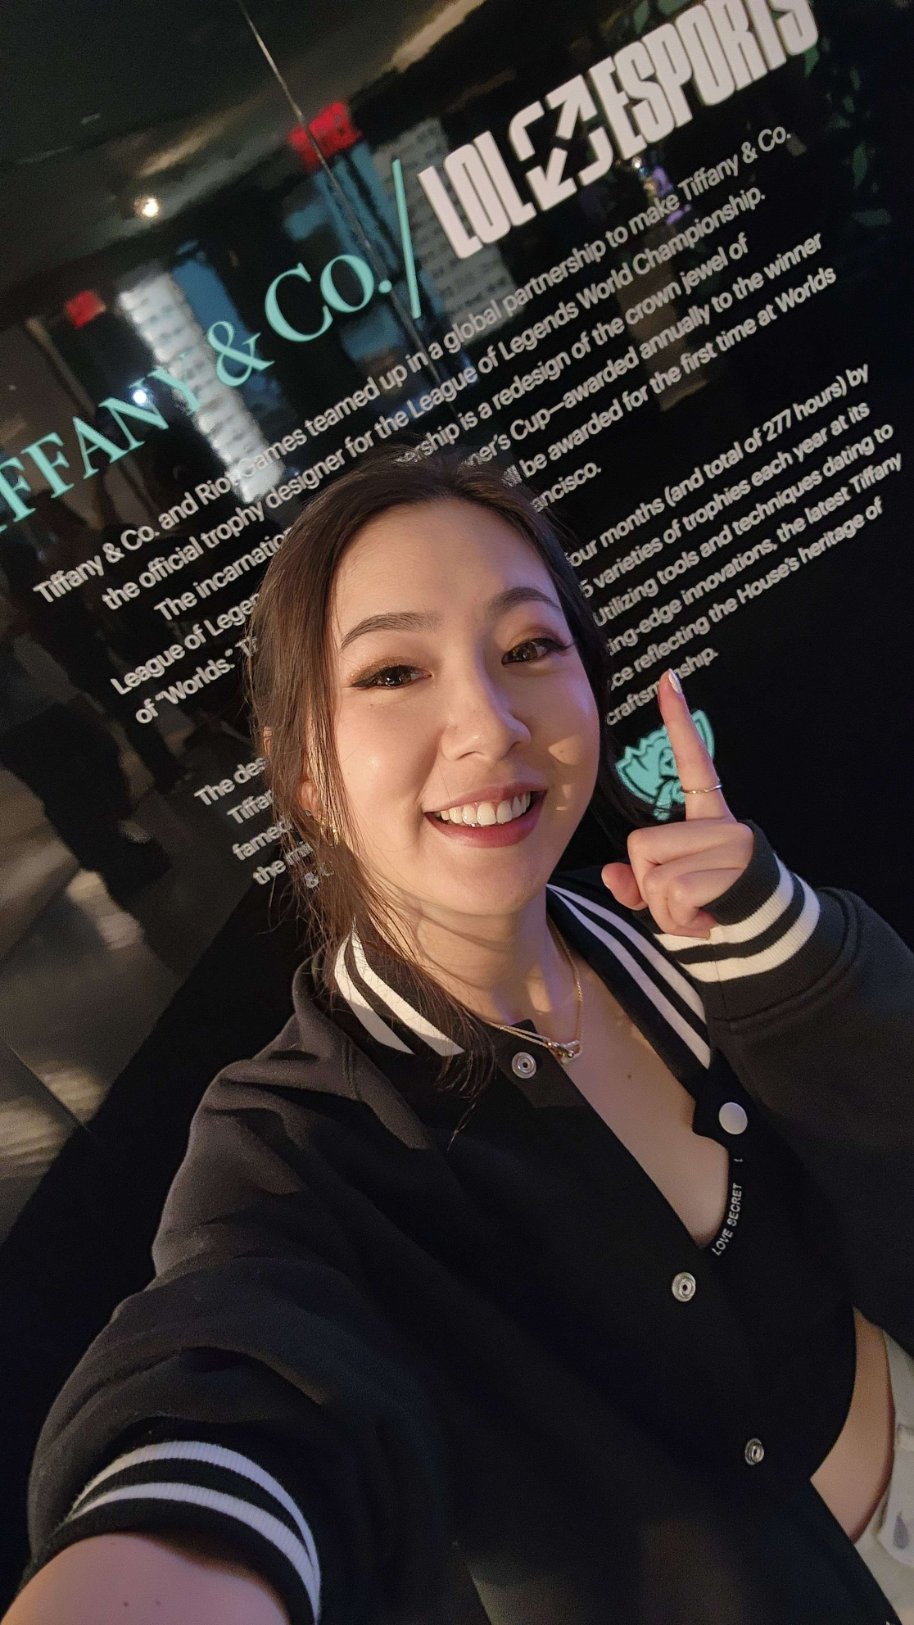 New League of Legends Summoner's Cup trophy has been designed by Tiffany  and Co